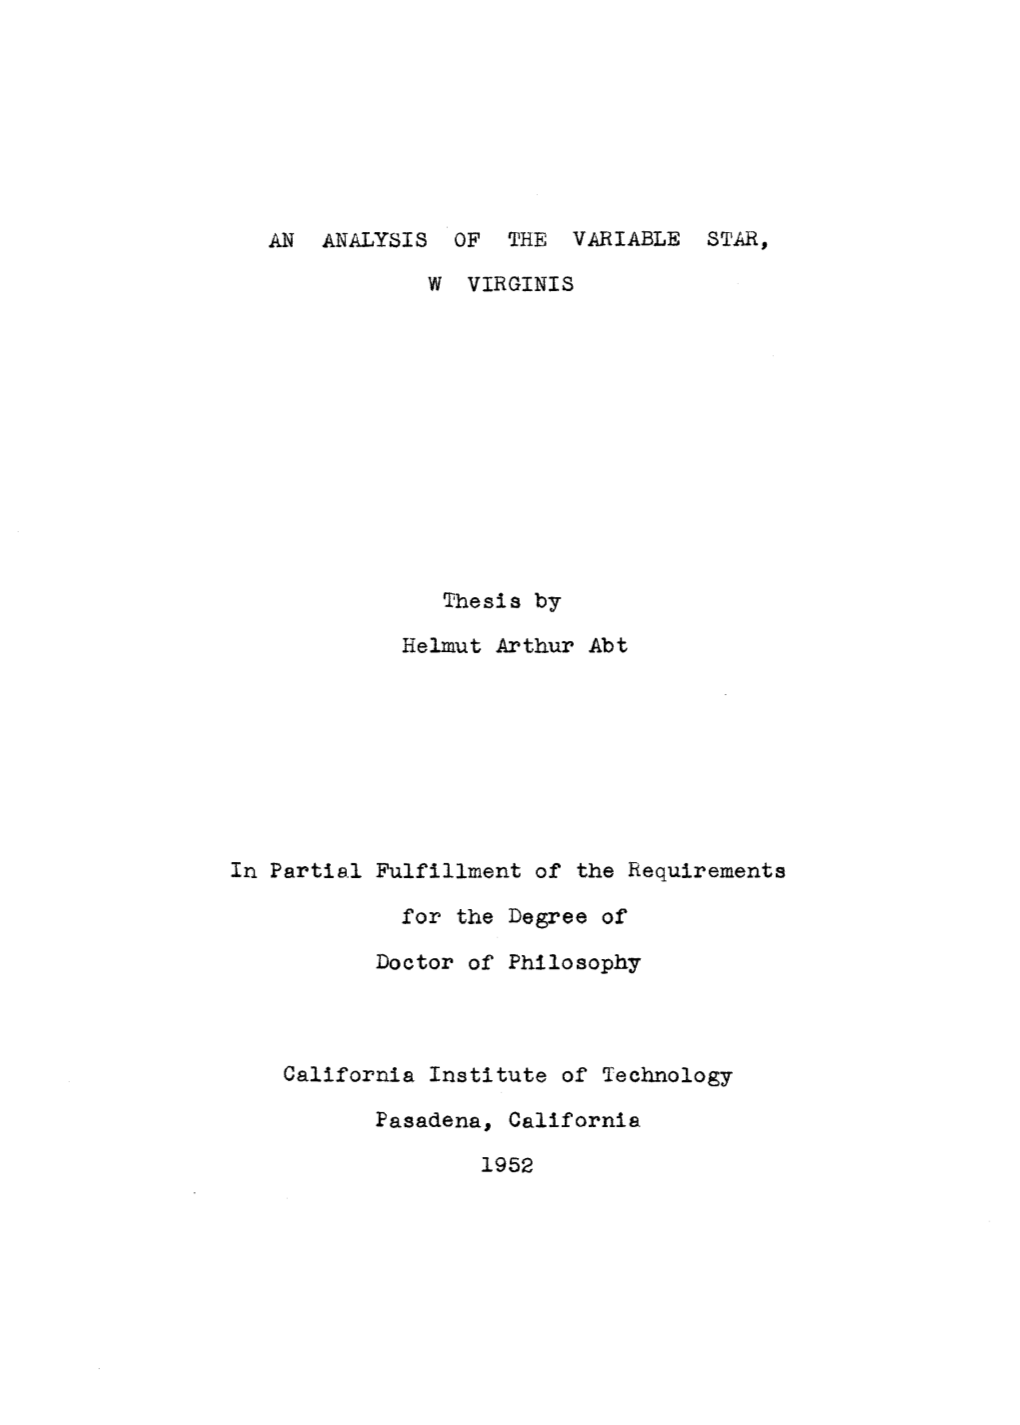 Thesis by Helmut Arthur Abt in Partib.L Fulfillment of the Requirements For